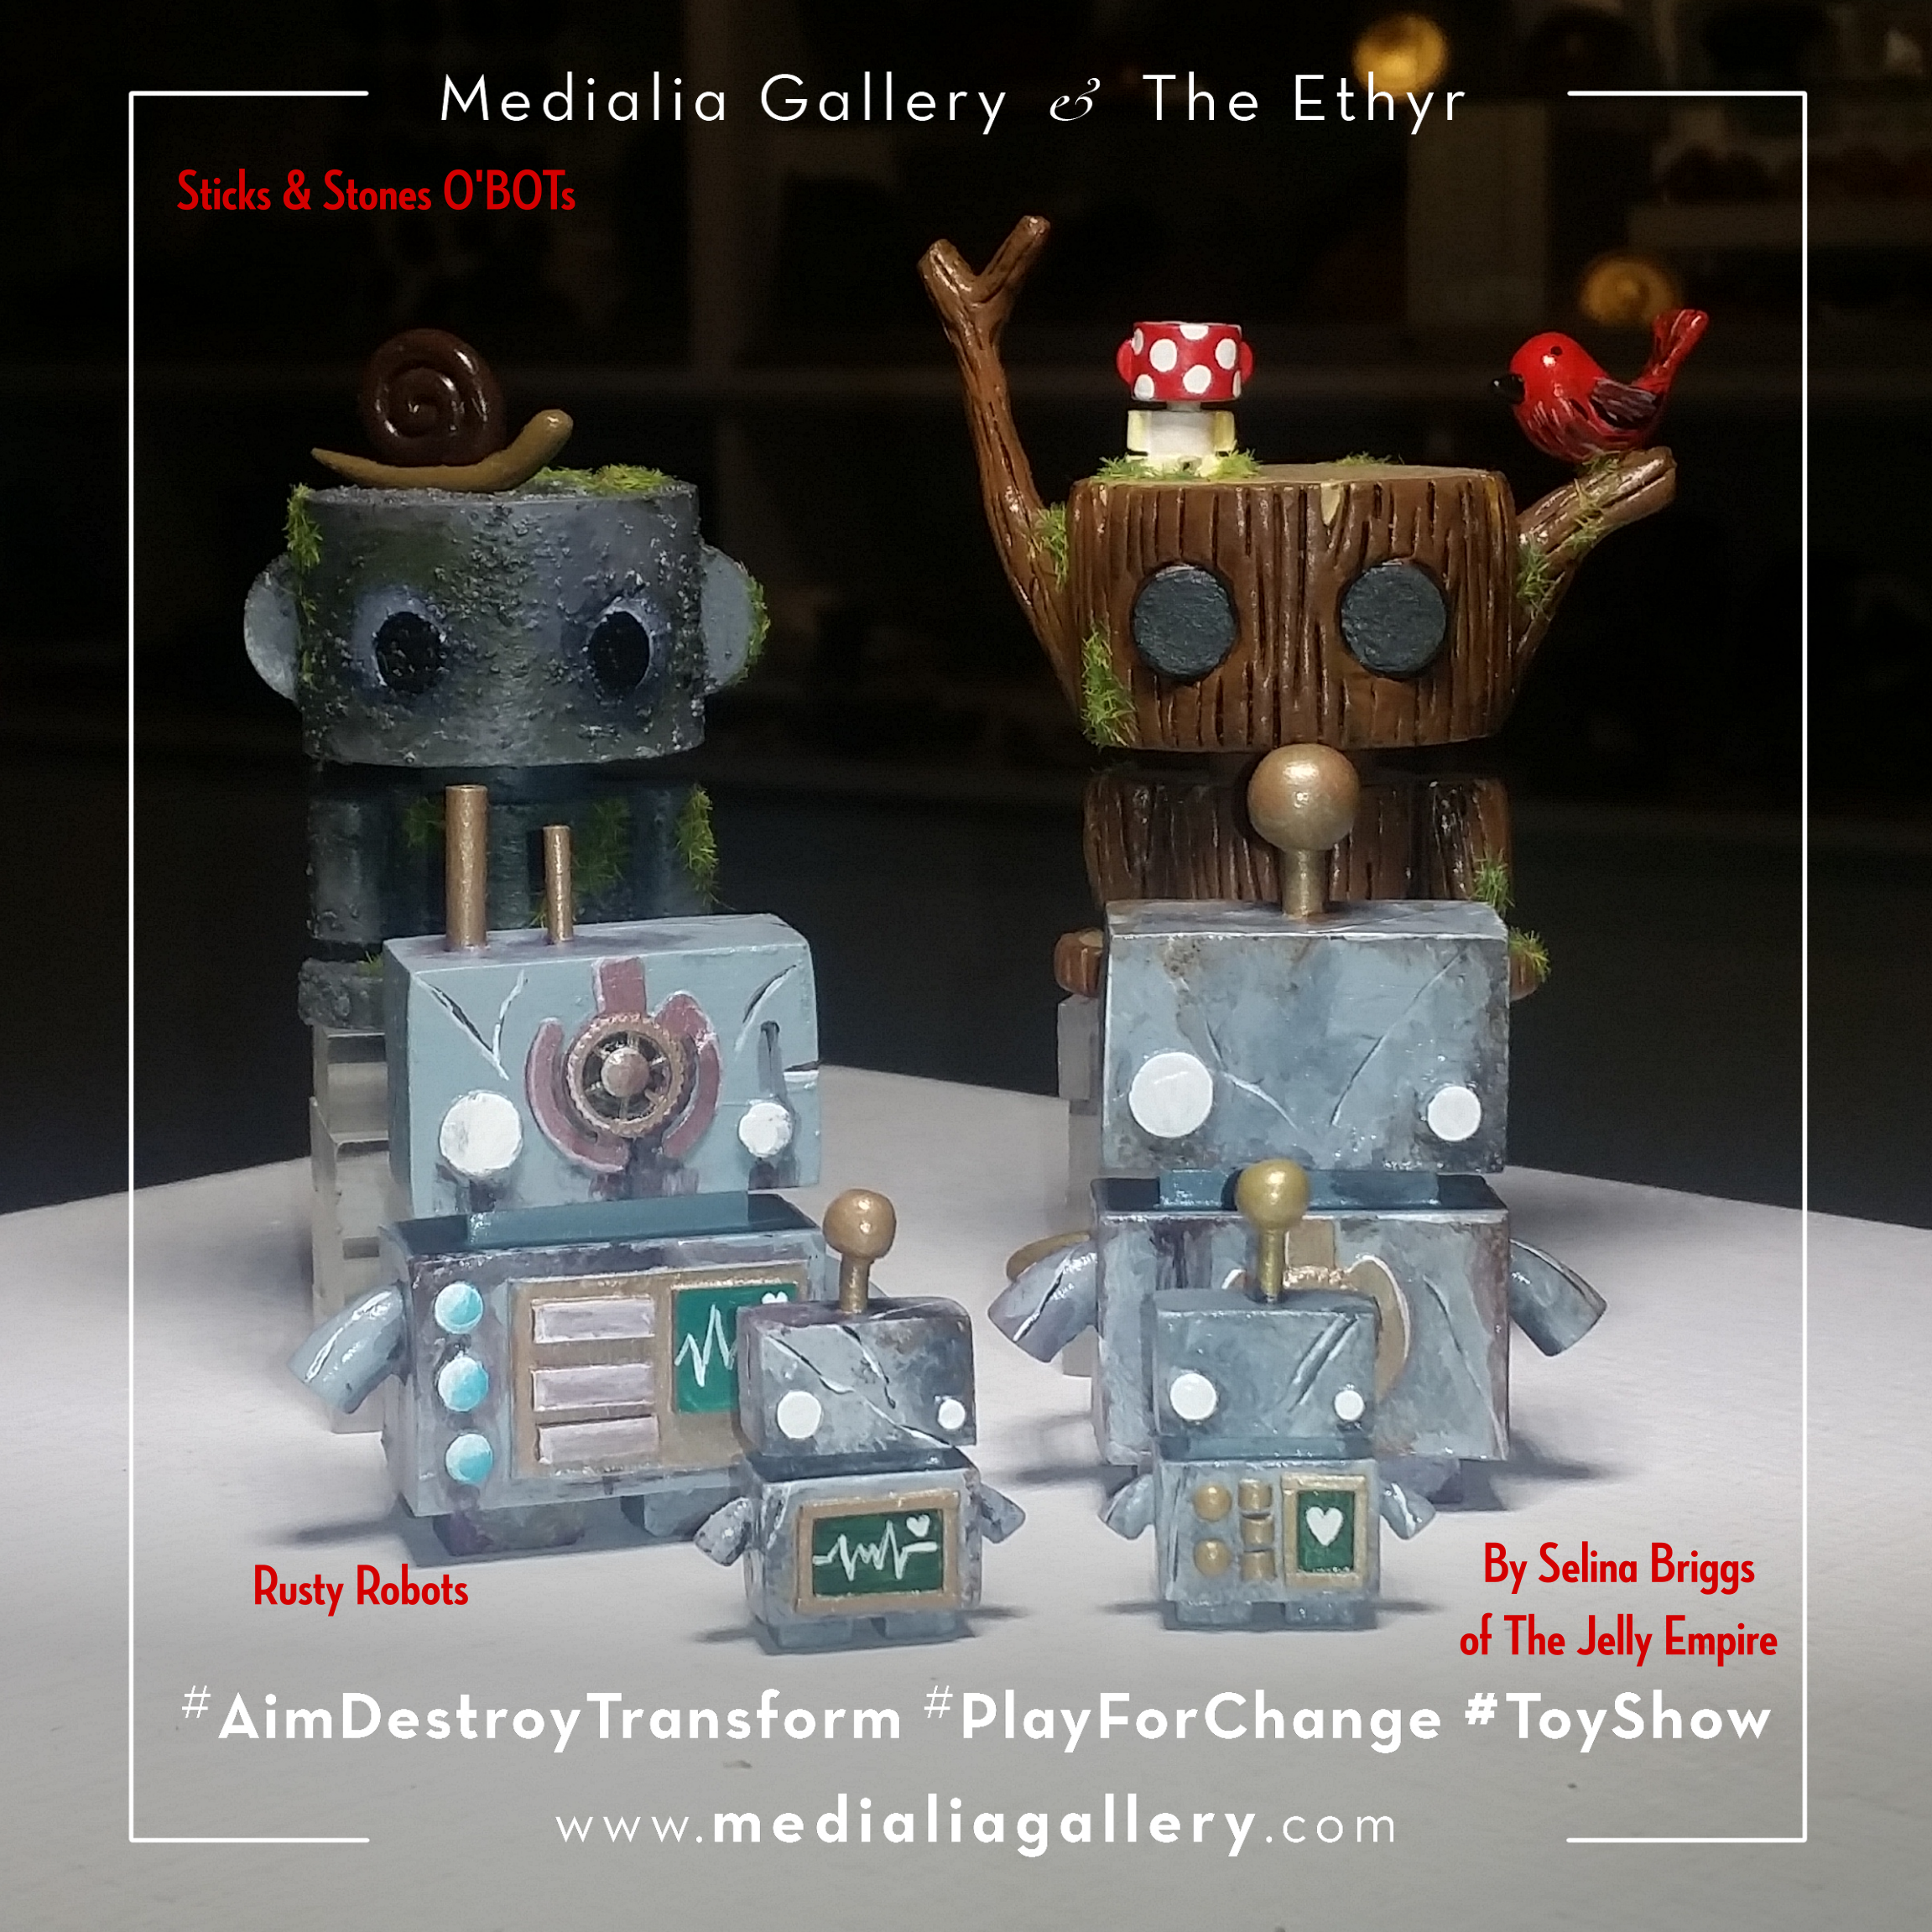 MedialiaGallery_The_Ethyr_AimDestroyTransform_Toy_Show_announcement_The_Jelly_Empire_Robots_Selina_Briggs_IV_November_2017.jpg.png